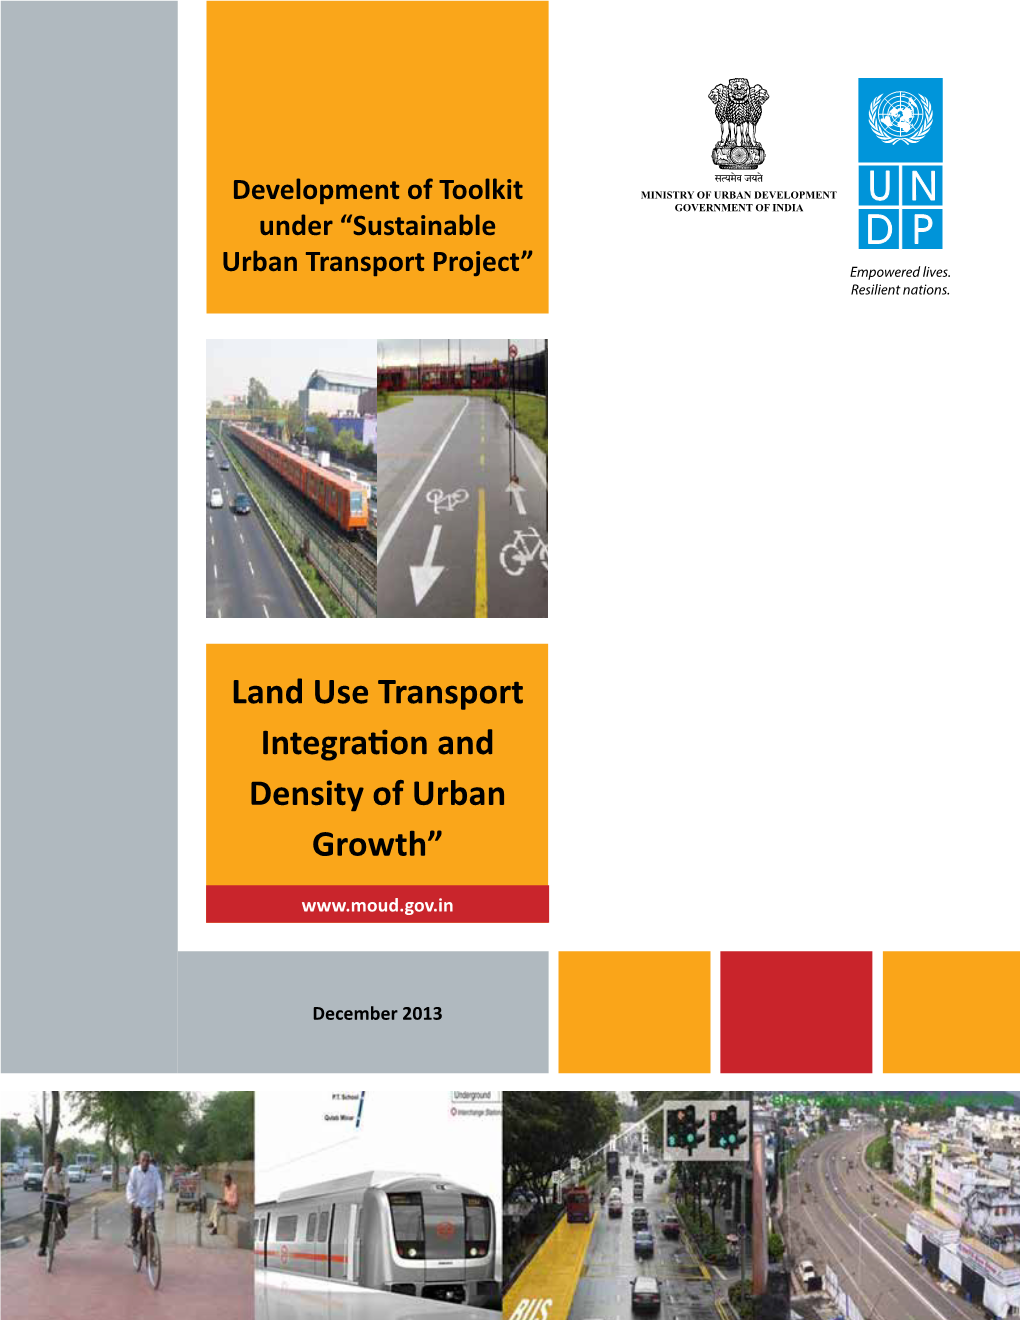 Land Use Transport Integration and Density of Urban Growth”